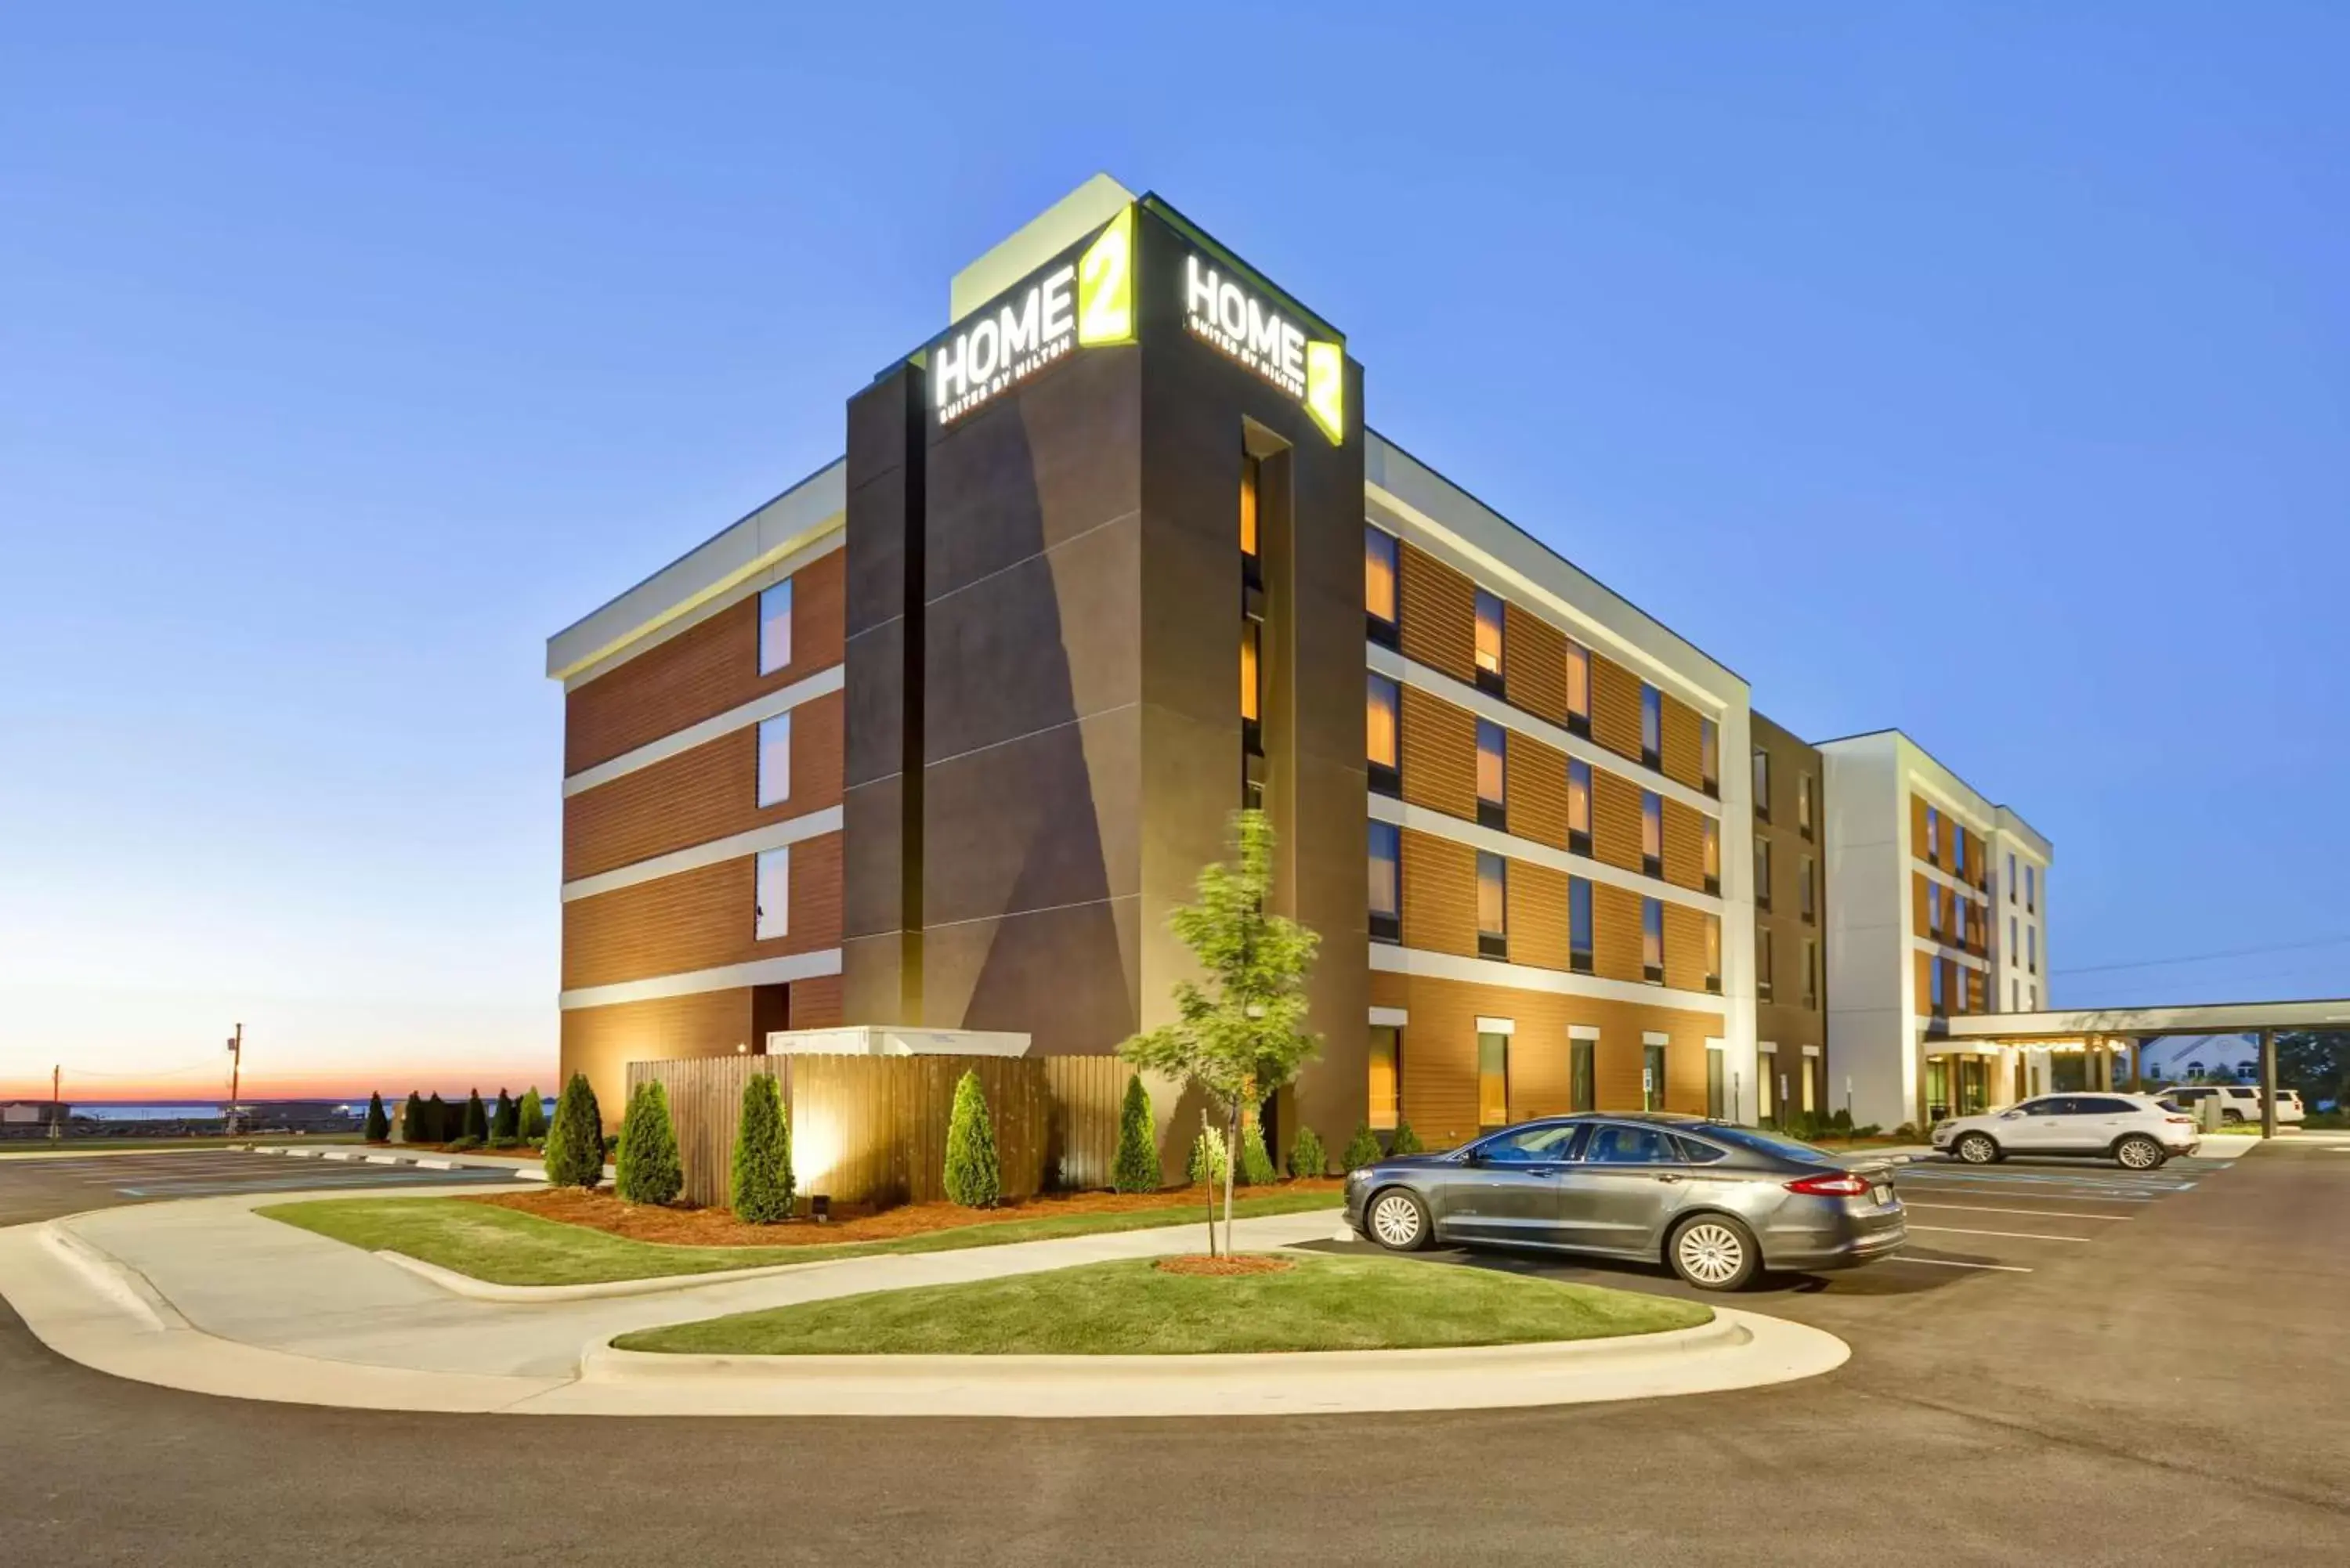 Property Building in Home2 Suites By Hilton Decatur Ingalls Harbor